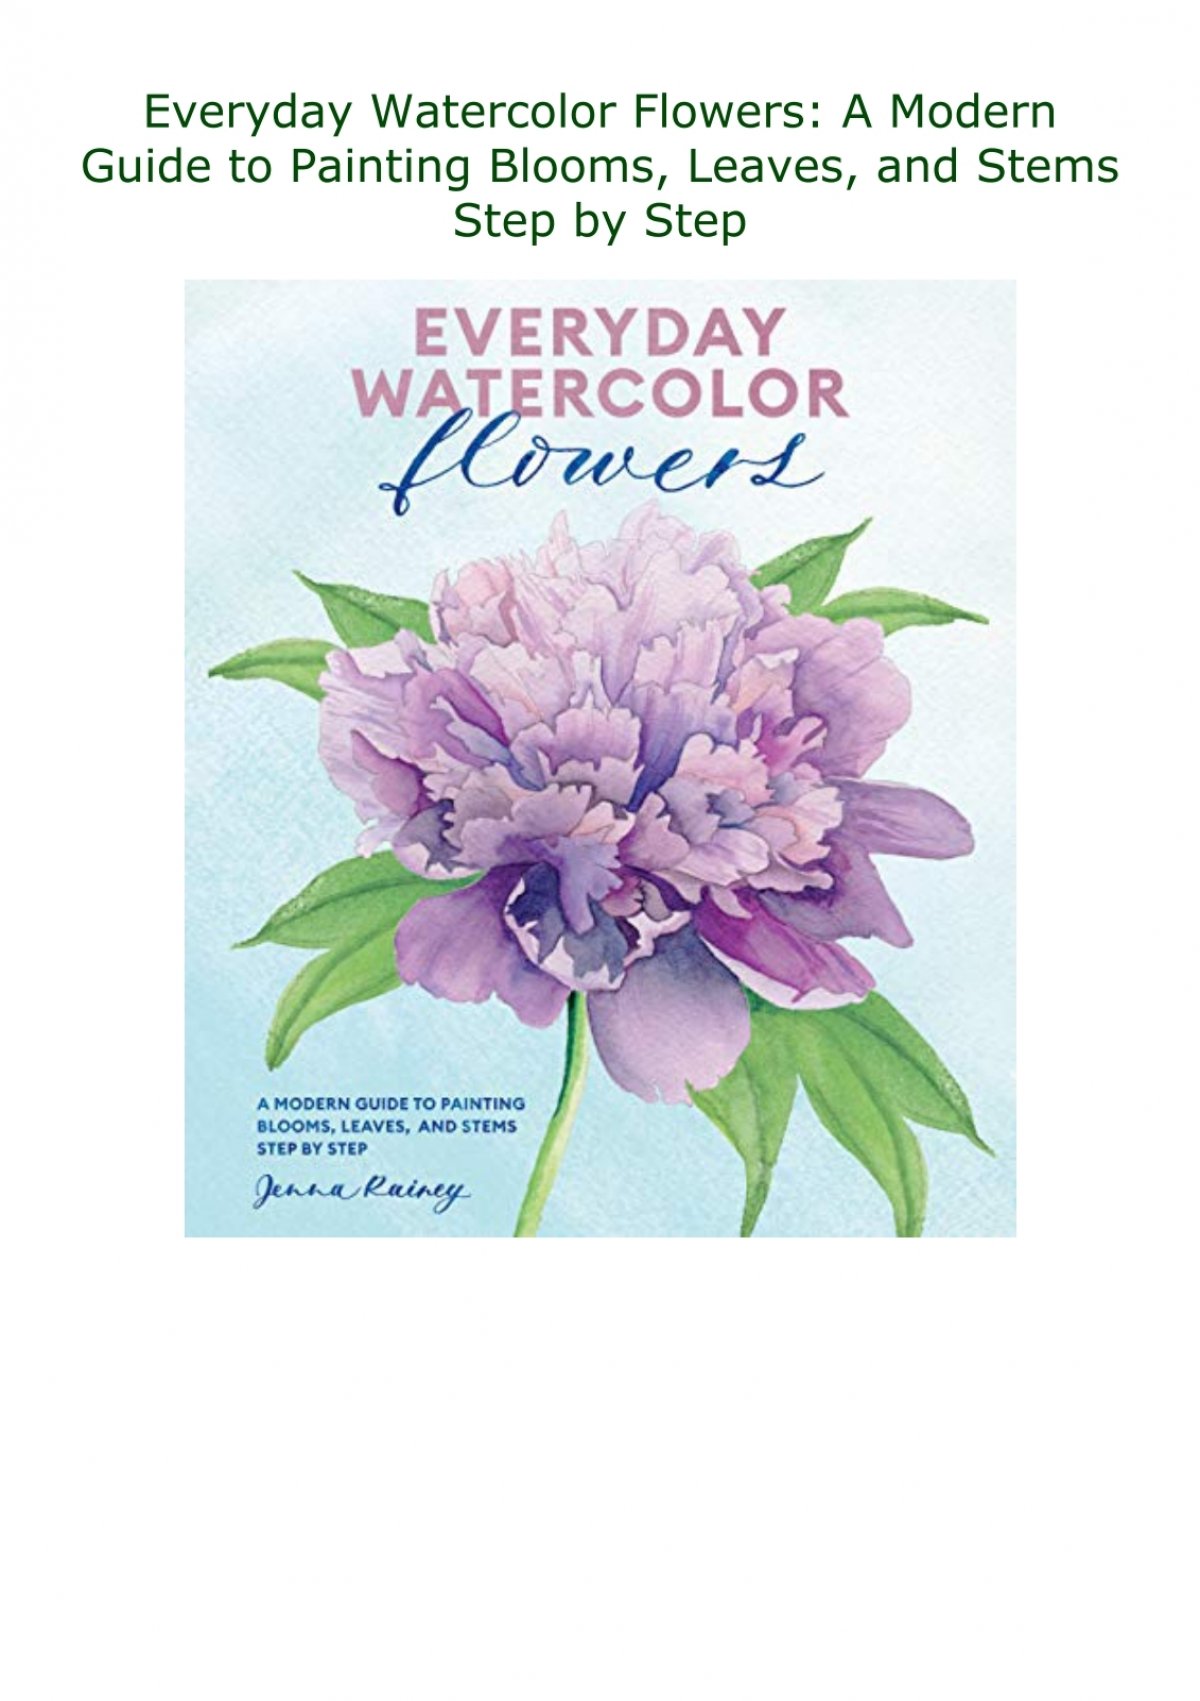 [PDF] DOWNLOAD Everyday Watercolor Flowers: A Modern Guide to Painting